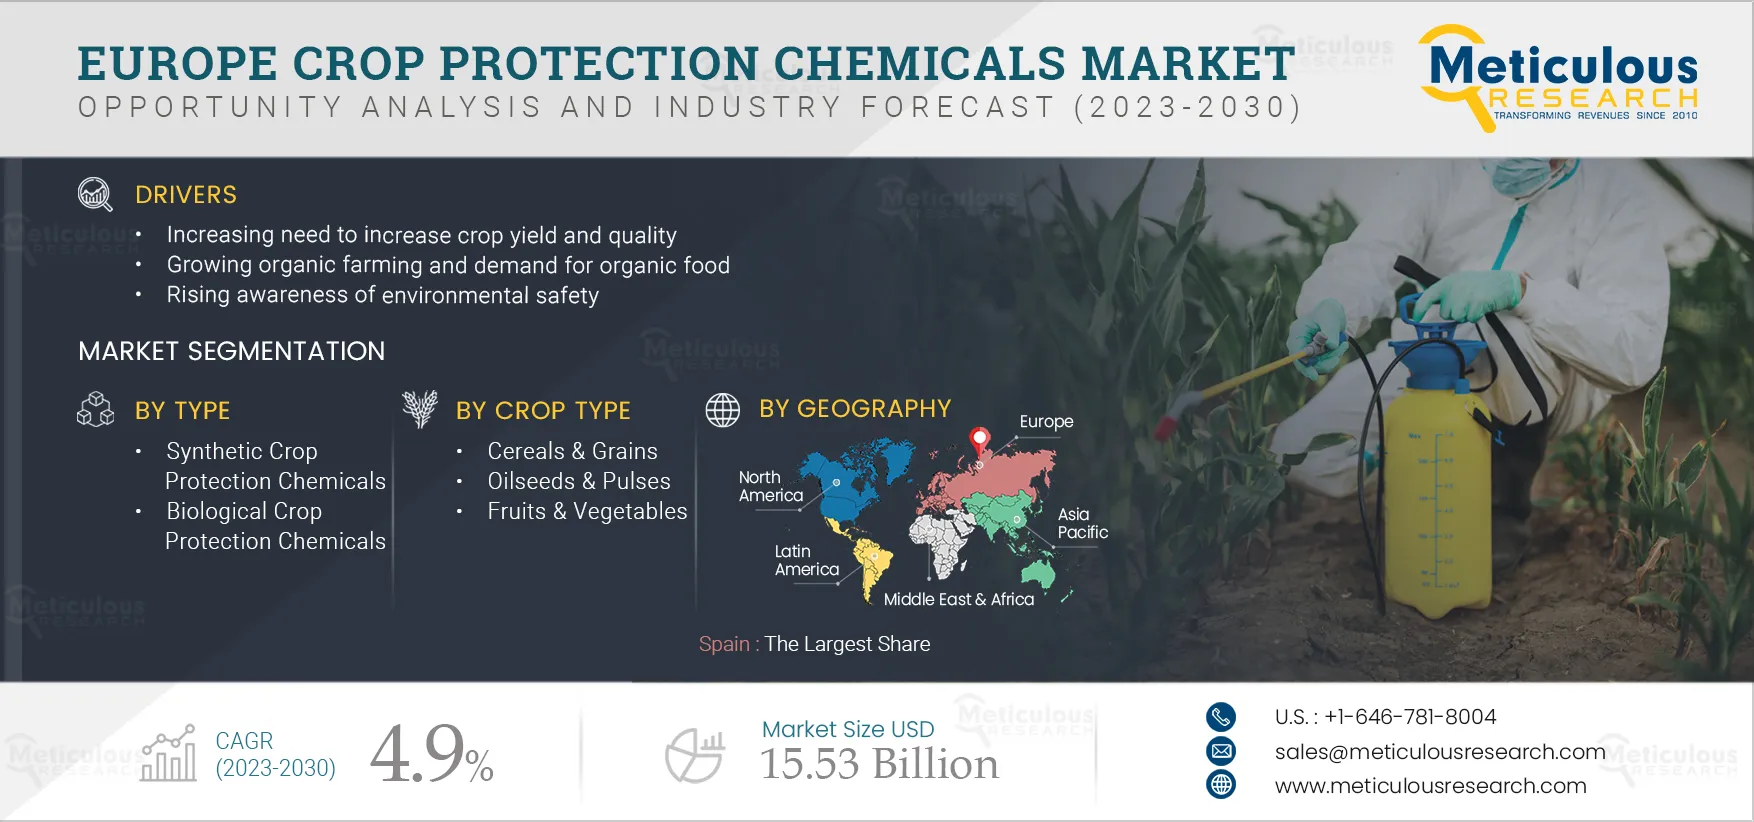 Europe Crop Protection Chemicals Market